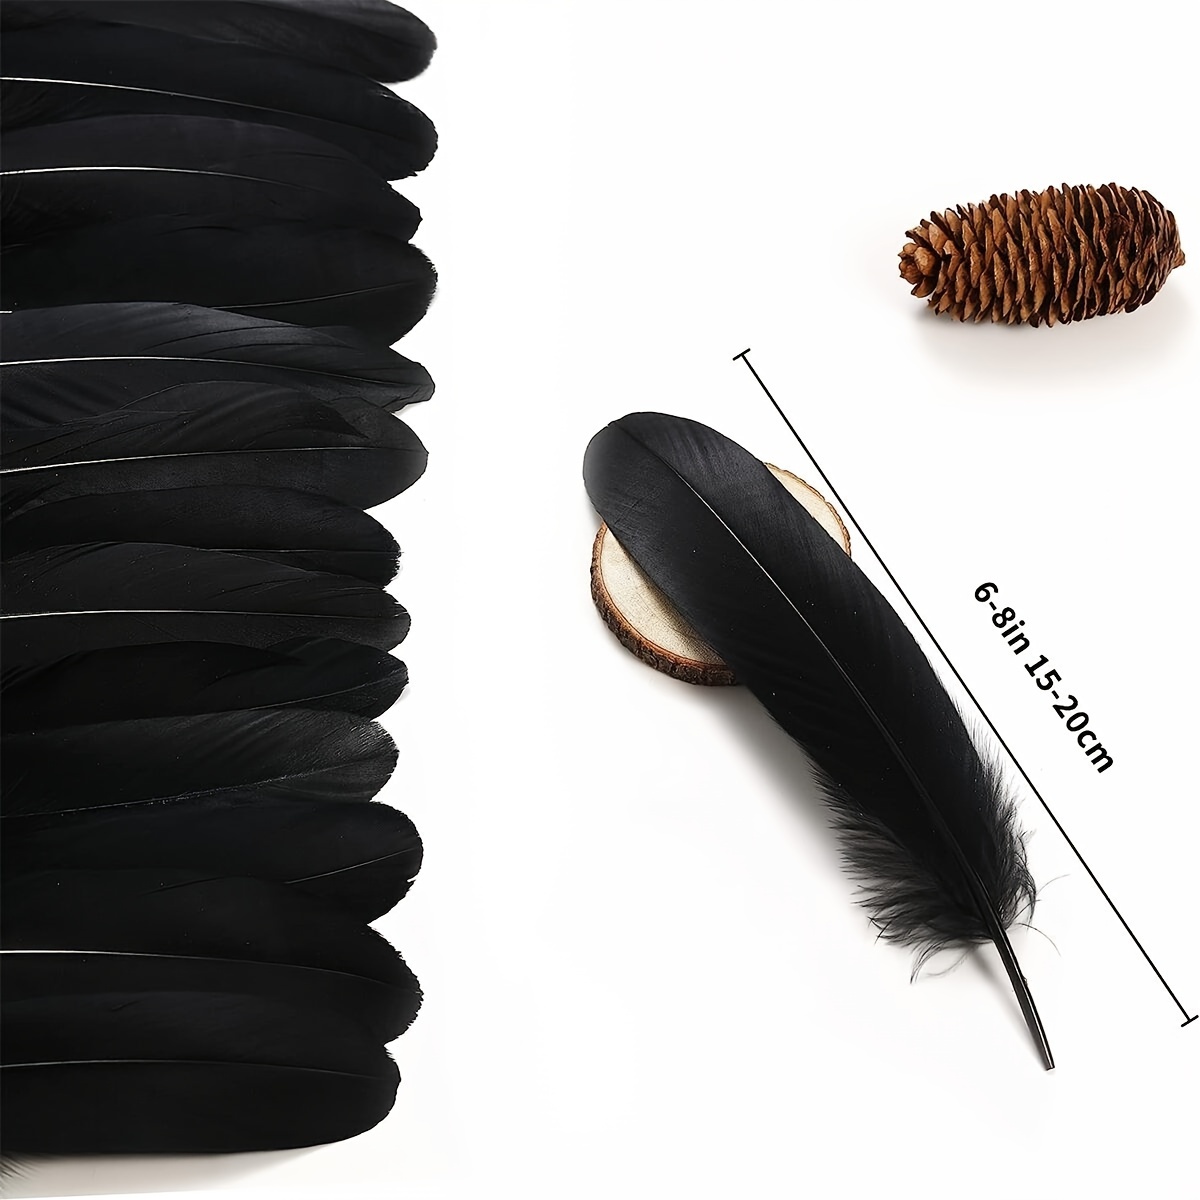  Black Feathers For Centerpieces